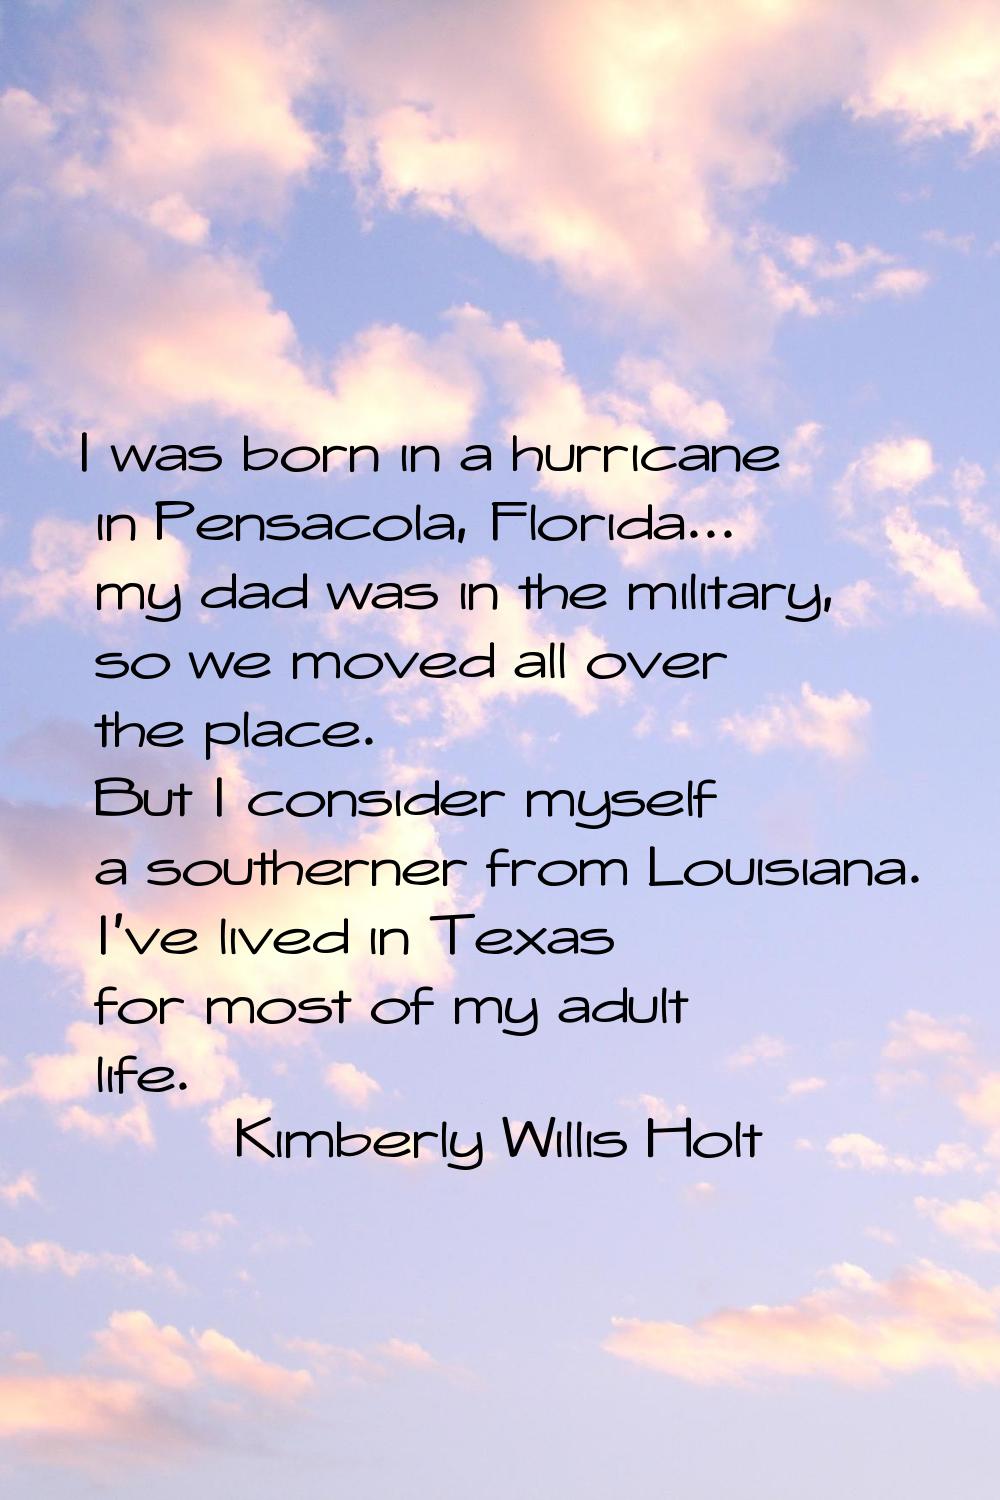 I was born in a hurricane in Pensacola, Florida... my dad was in the military, so we moved all over